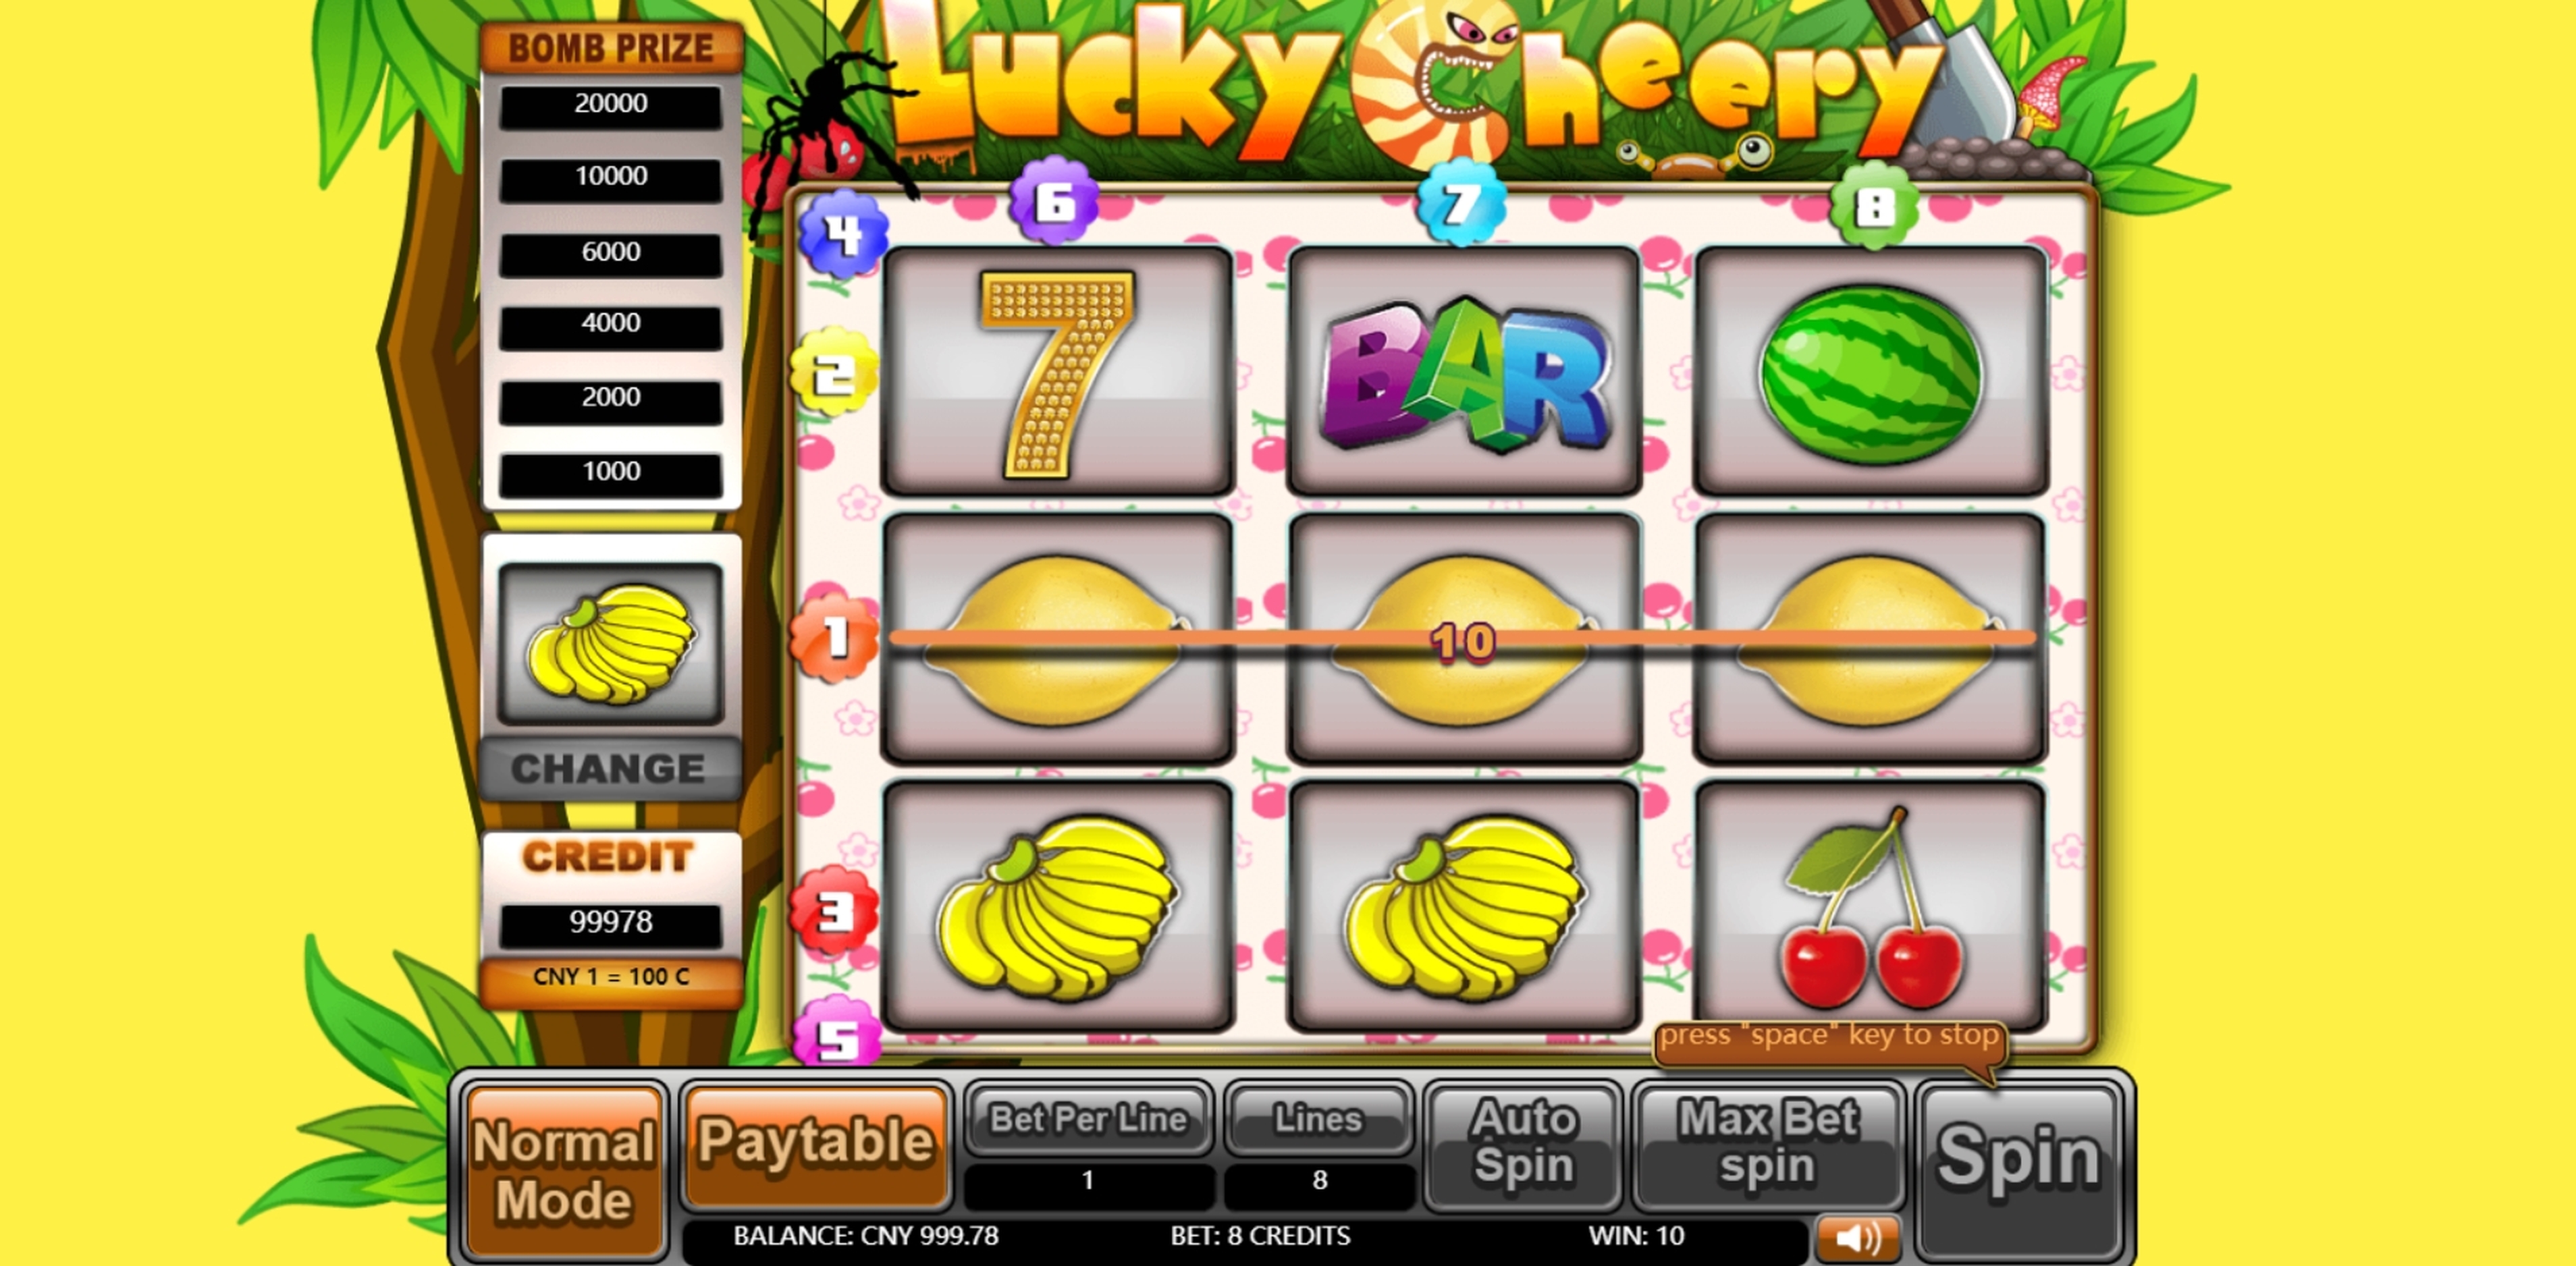 Win Money in Lucky Cheery Free Slot Game by Aiwin Games